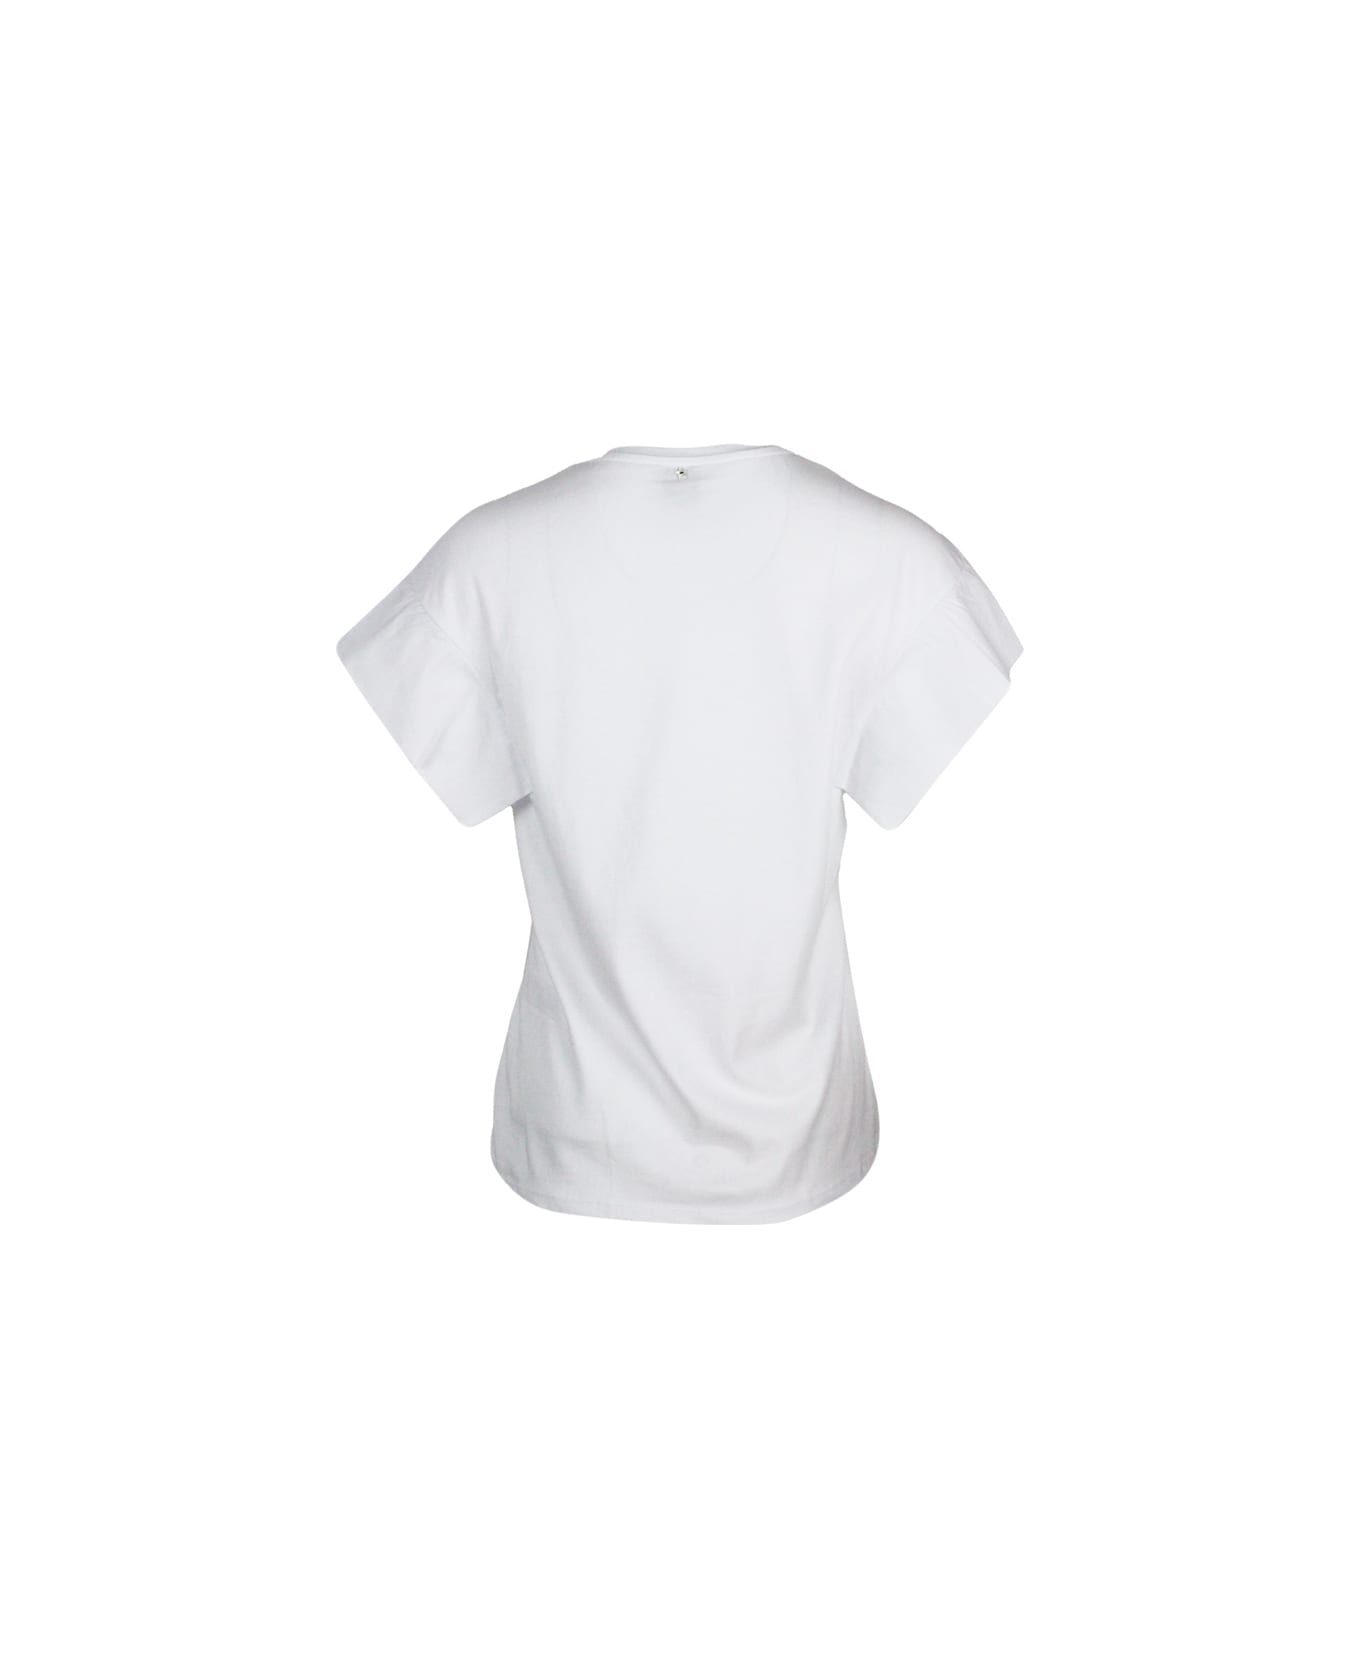 Lorena Antoniazzi Round Neck T-shirt In Cotton Jersey With Flared Cap Sleeves - White